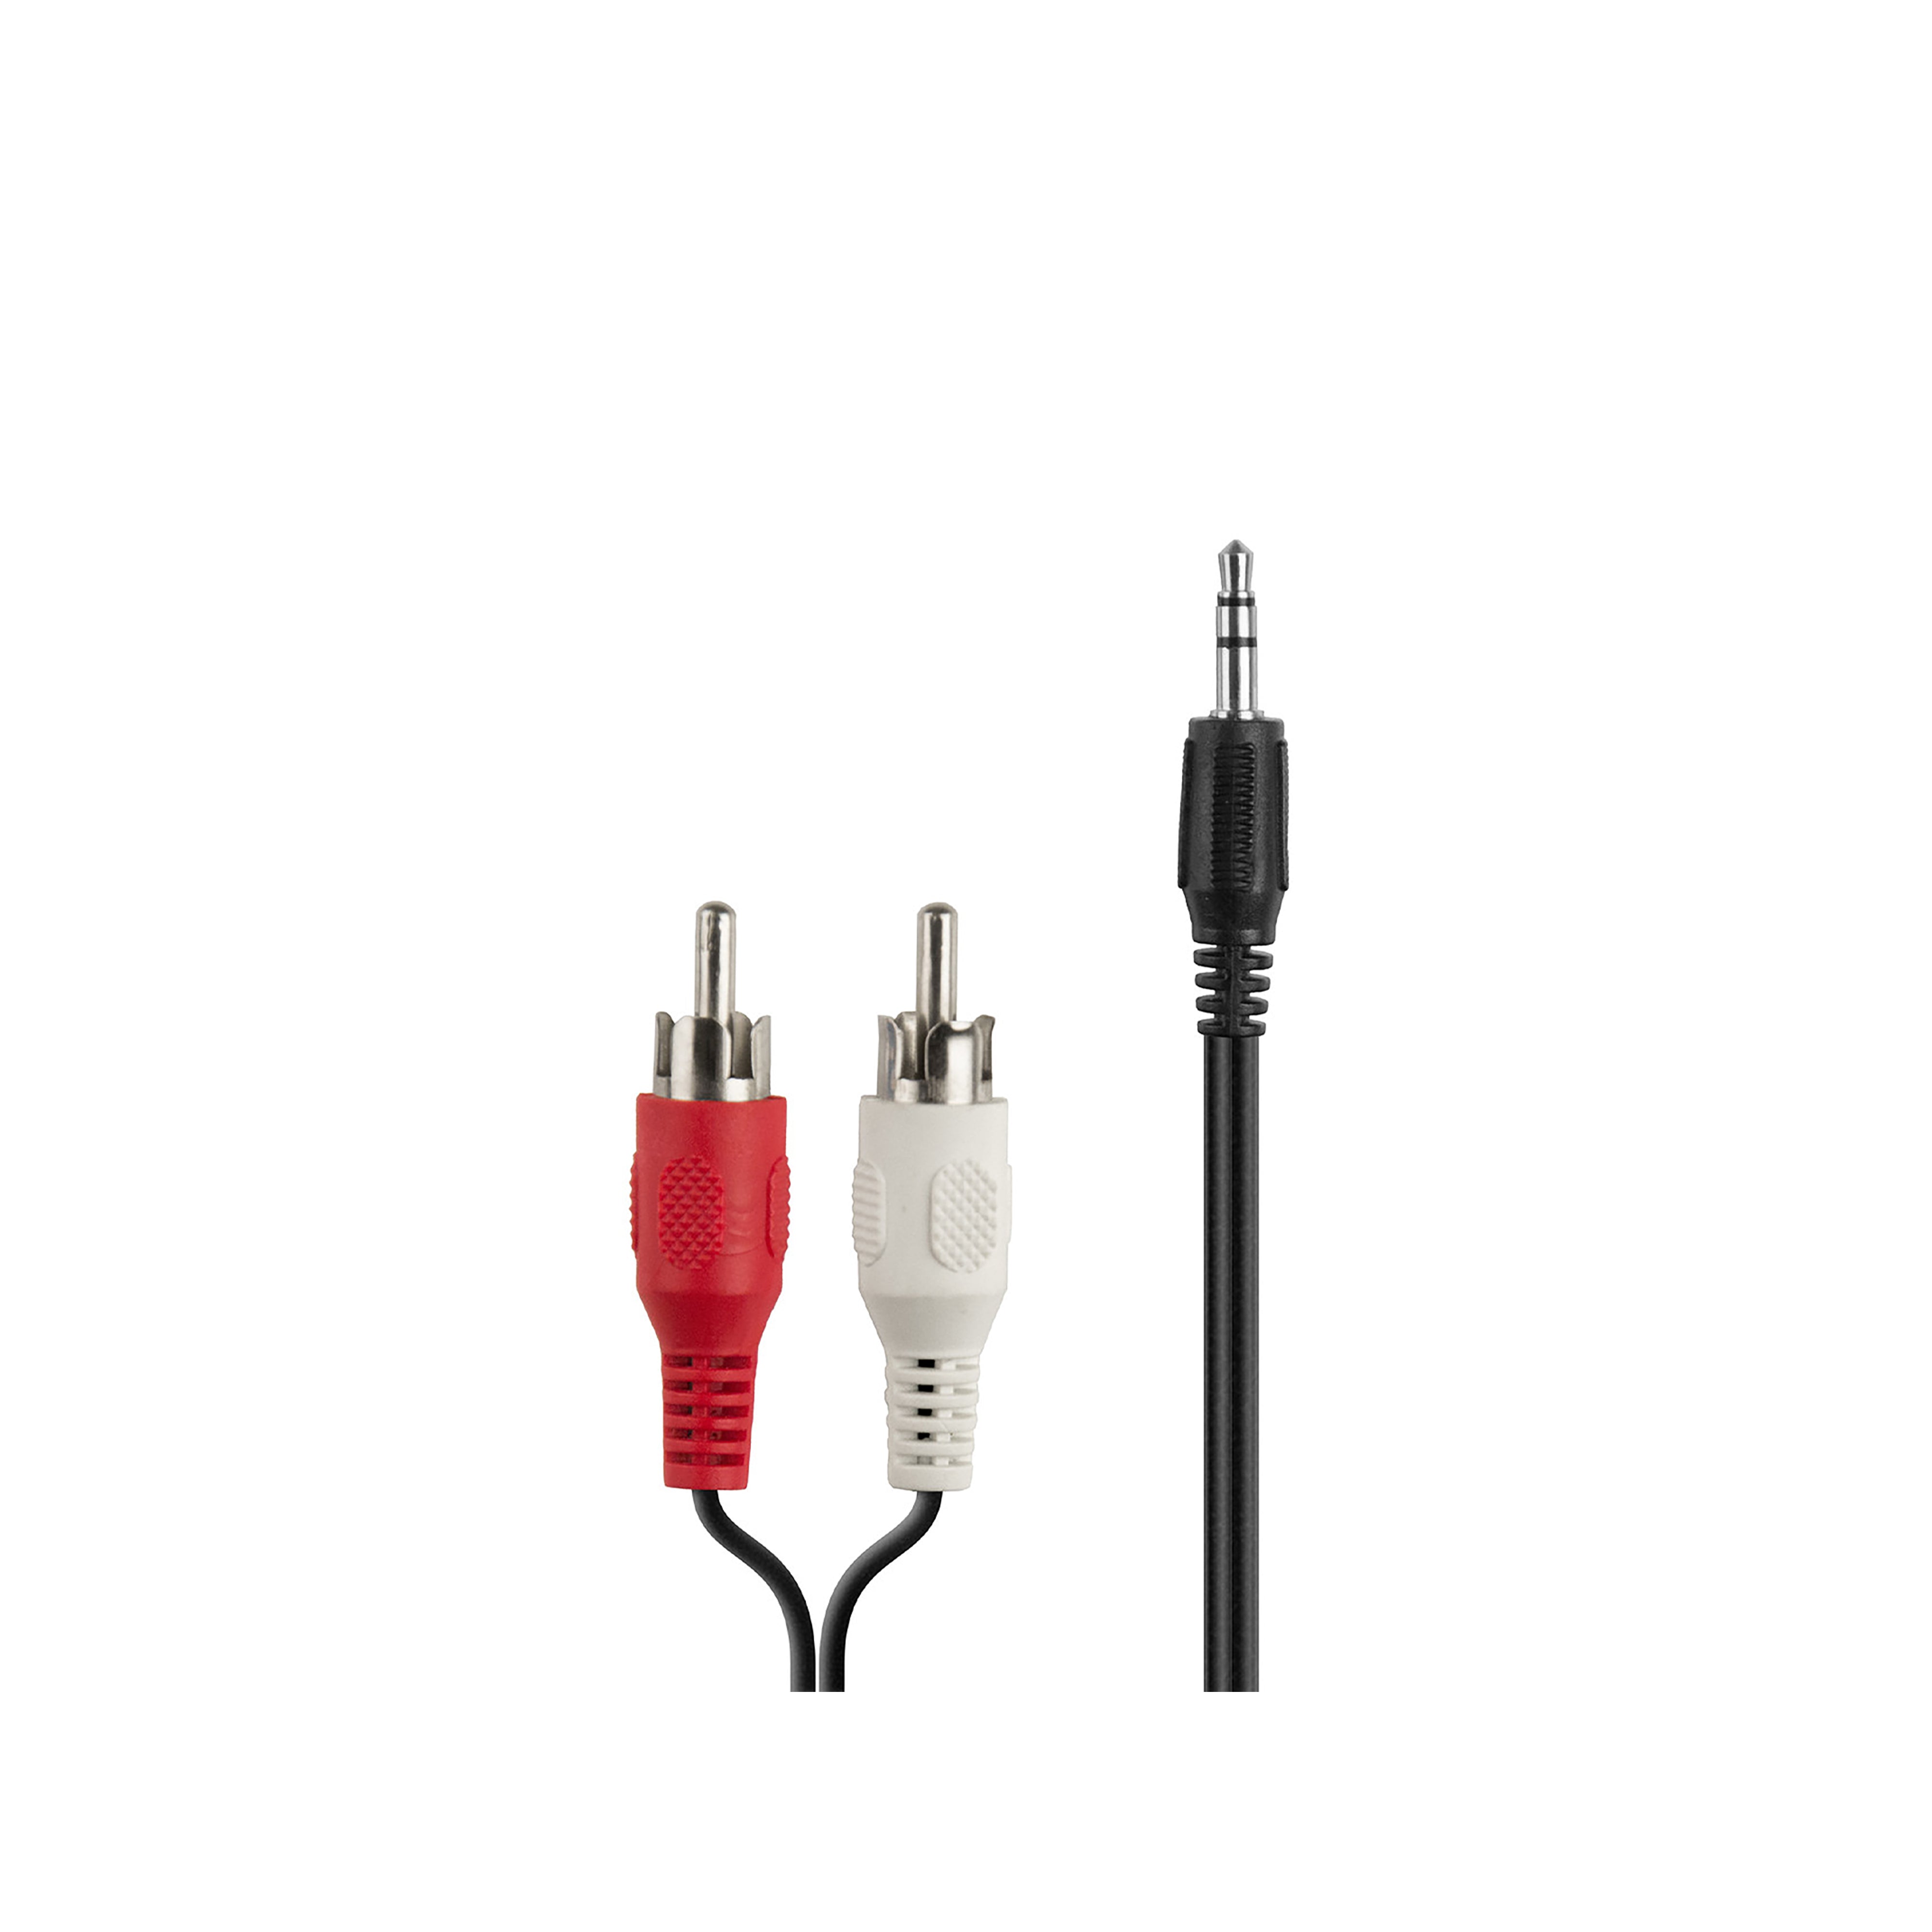 Image of Replacement RCA to 3.5 mm Stereo AUX Audio Cable.